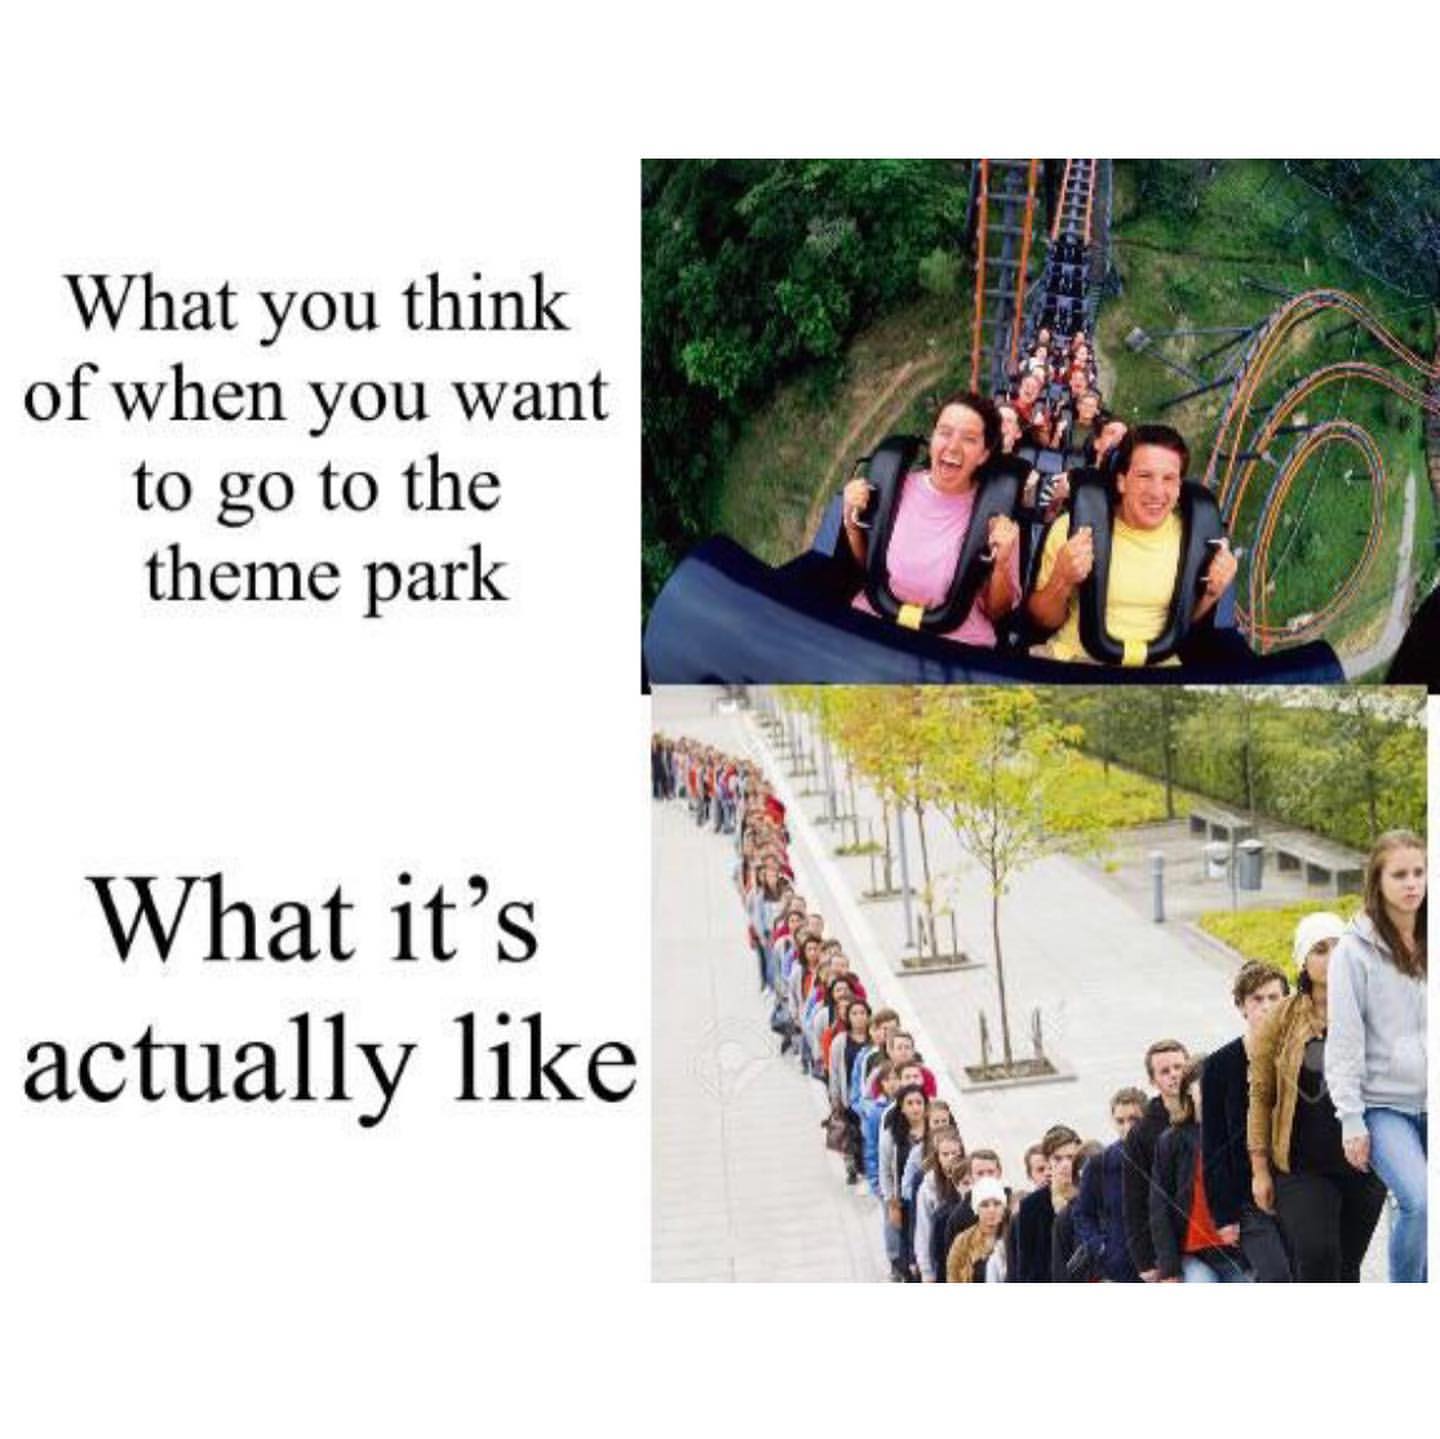 What you think of when you want to go to the theme park. What it's actually like.